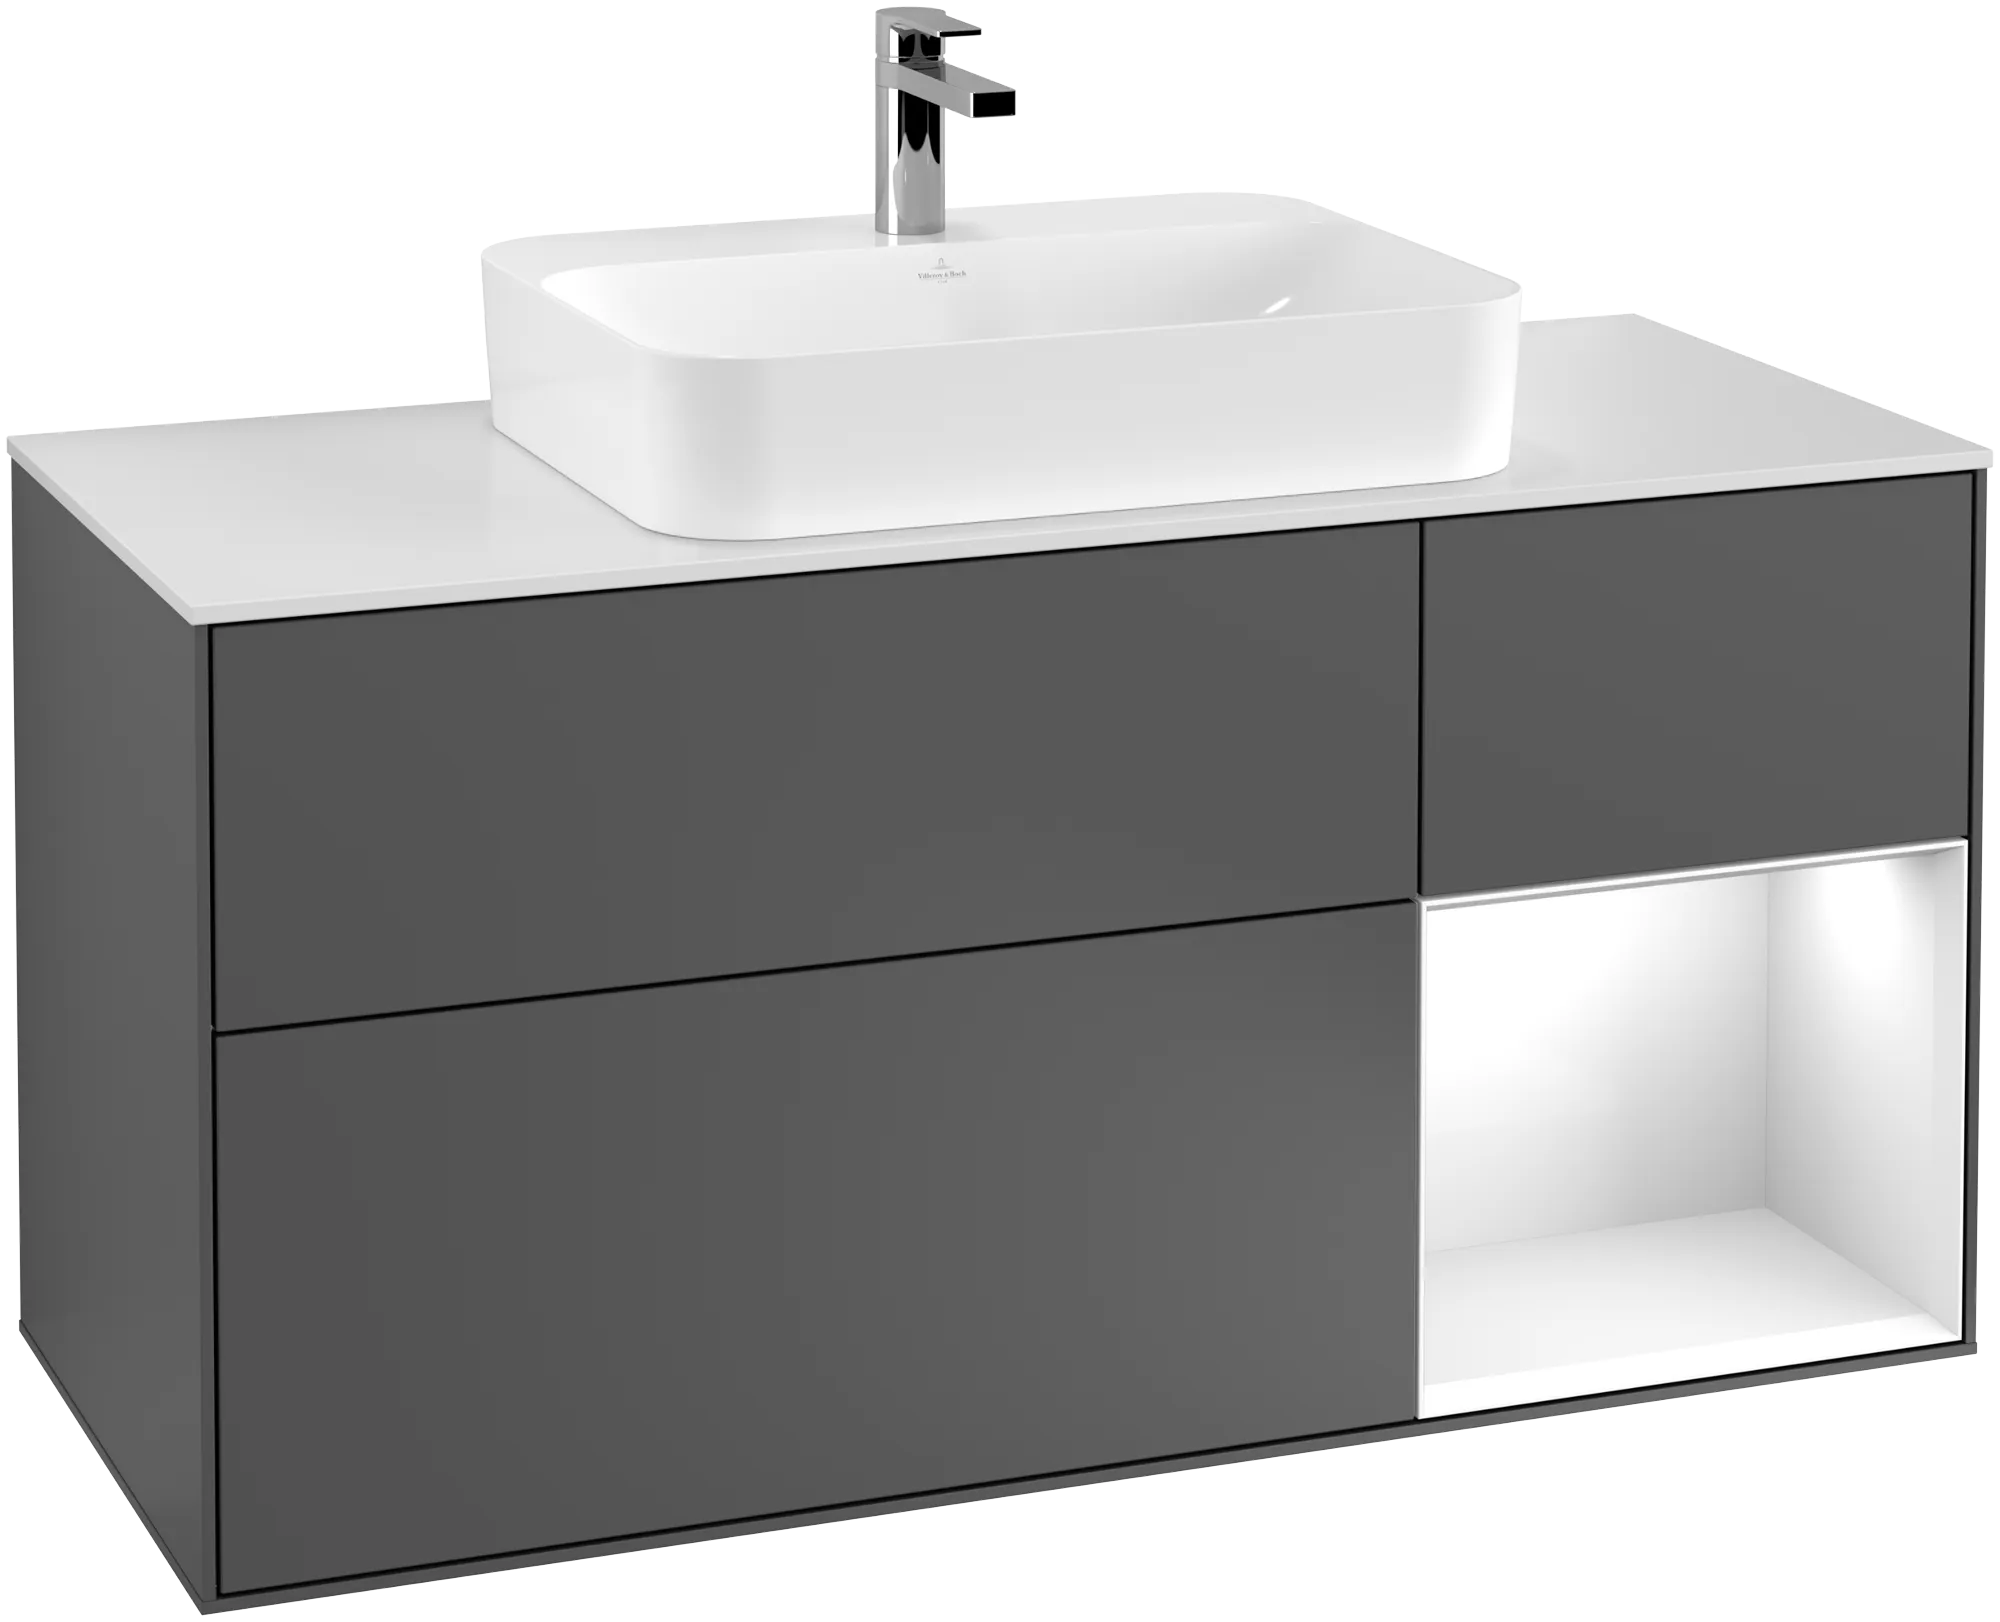 VILLEROY BOCH Finion Vanity unit, with lighting, 3 pull-out compartments, 1200 x 603 x 501 mm, Anthracite Matt Lacquer / Glossy White Lacquer / Glass White Matt #G421GFGK resmi